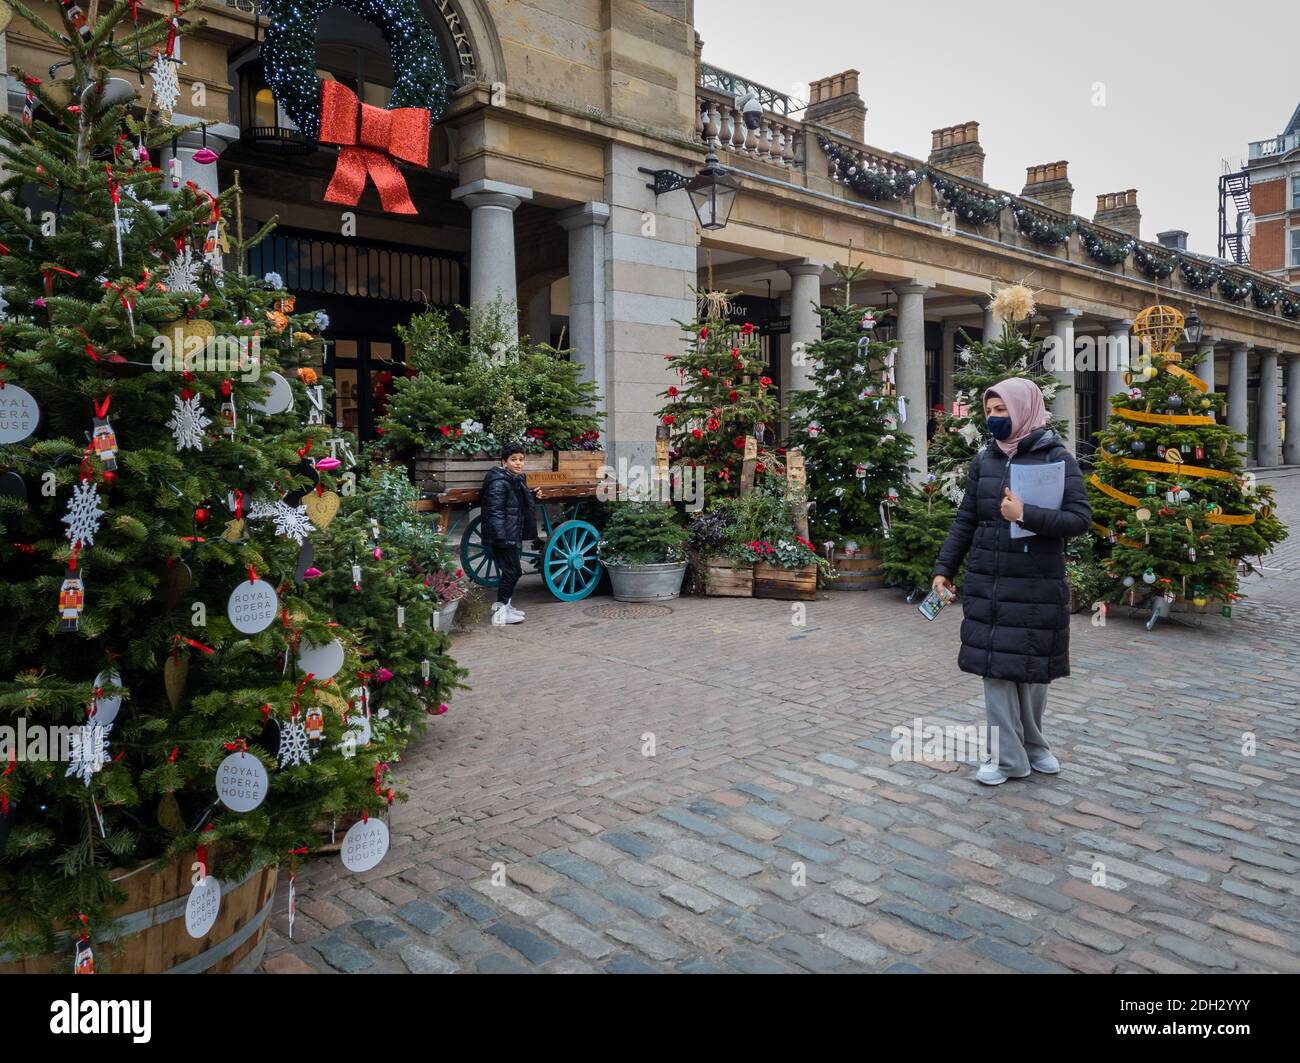 Christmas decorations in London Covent Garden with few visitors. Covid-19 lockdown and Covid Tiers have had serious impacted the hospitality industry. Stock Photo